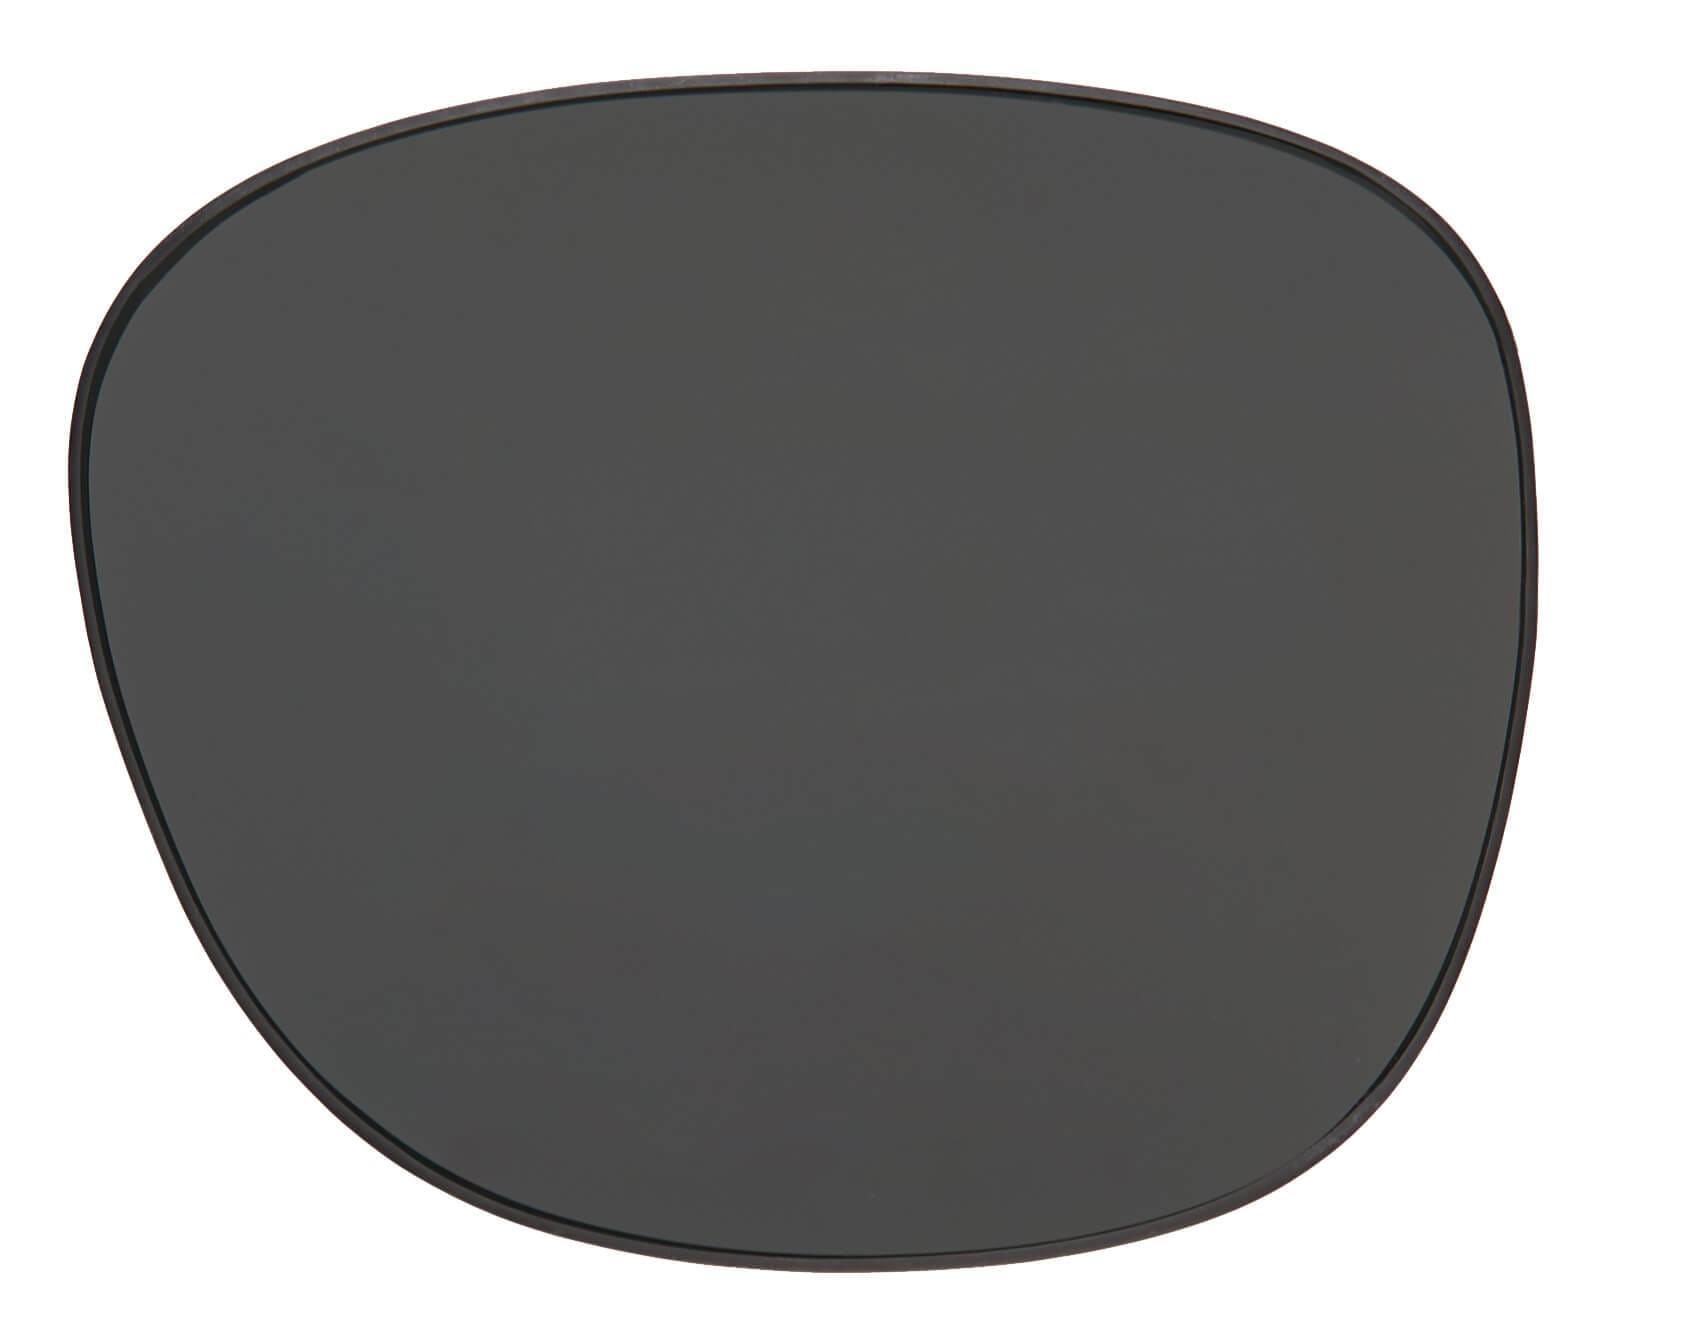 Custom clip-ons. Our polarized custom clip-ons reduce glare and are available for almost any frame. Each clip-on is specially cut to fit the frame with prices starting at just $4.95  (Compare to $50). Zenni square glasses #2020123 in clear, shown with gray polarized custom clip-on.